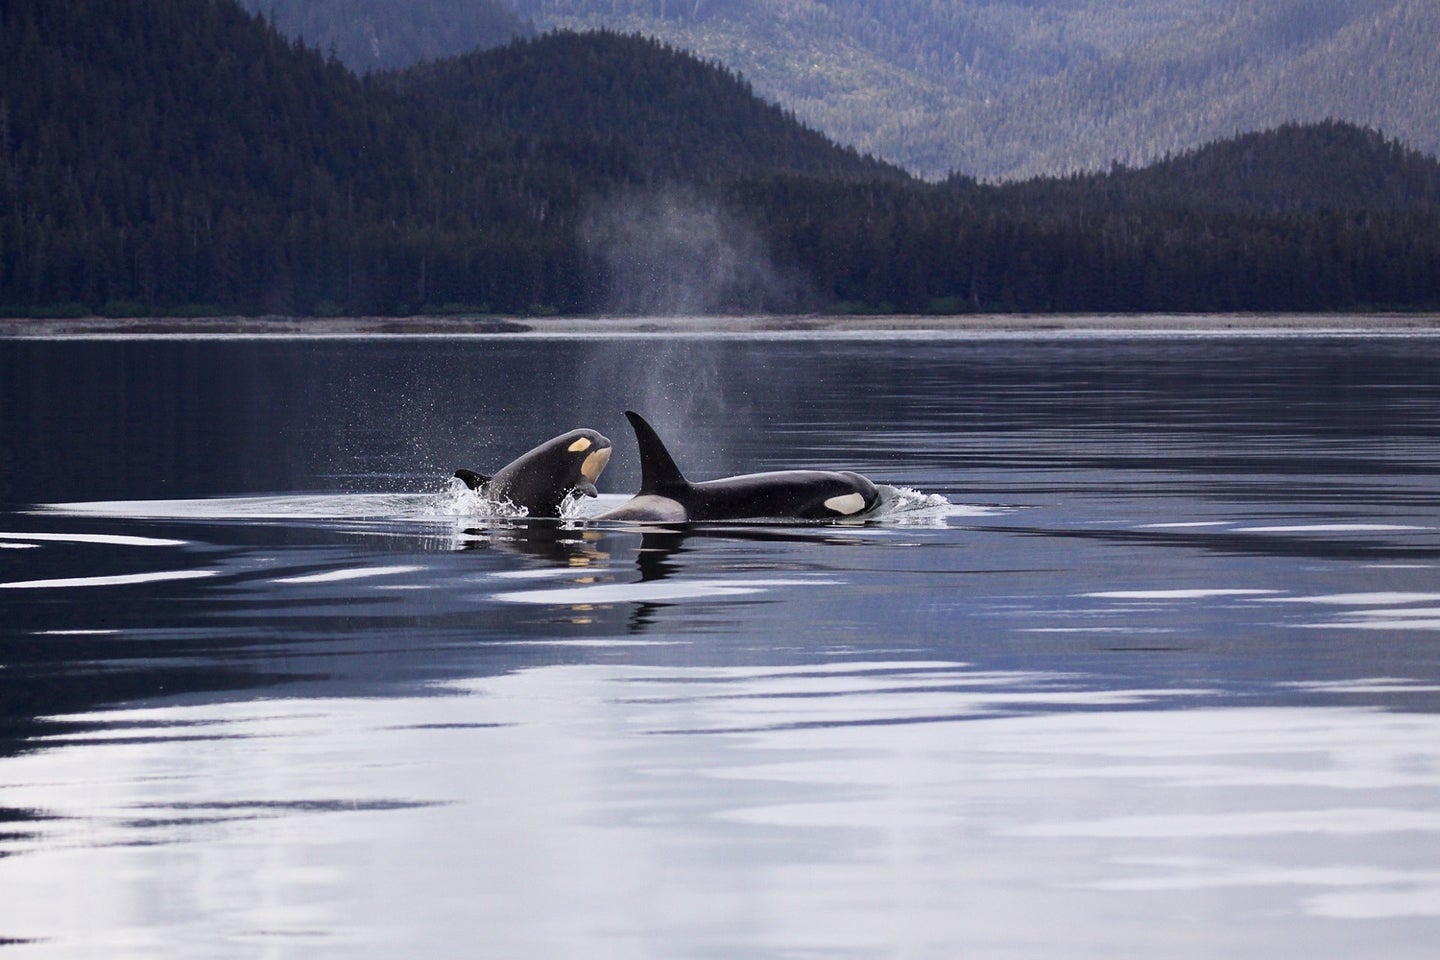 Mother and baby killer whale swimming in ocean with mountains in the background.